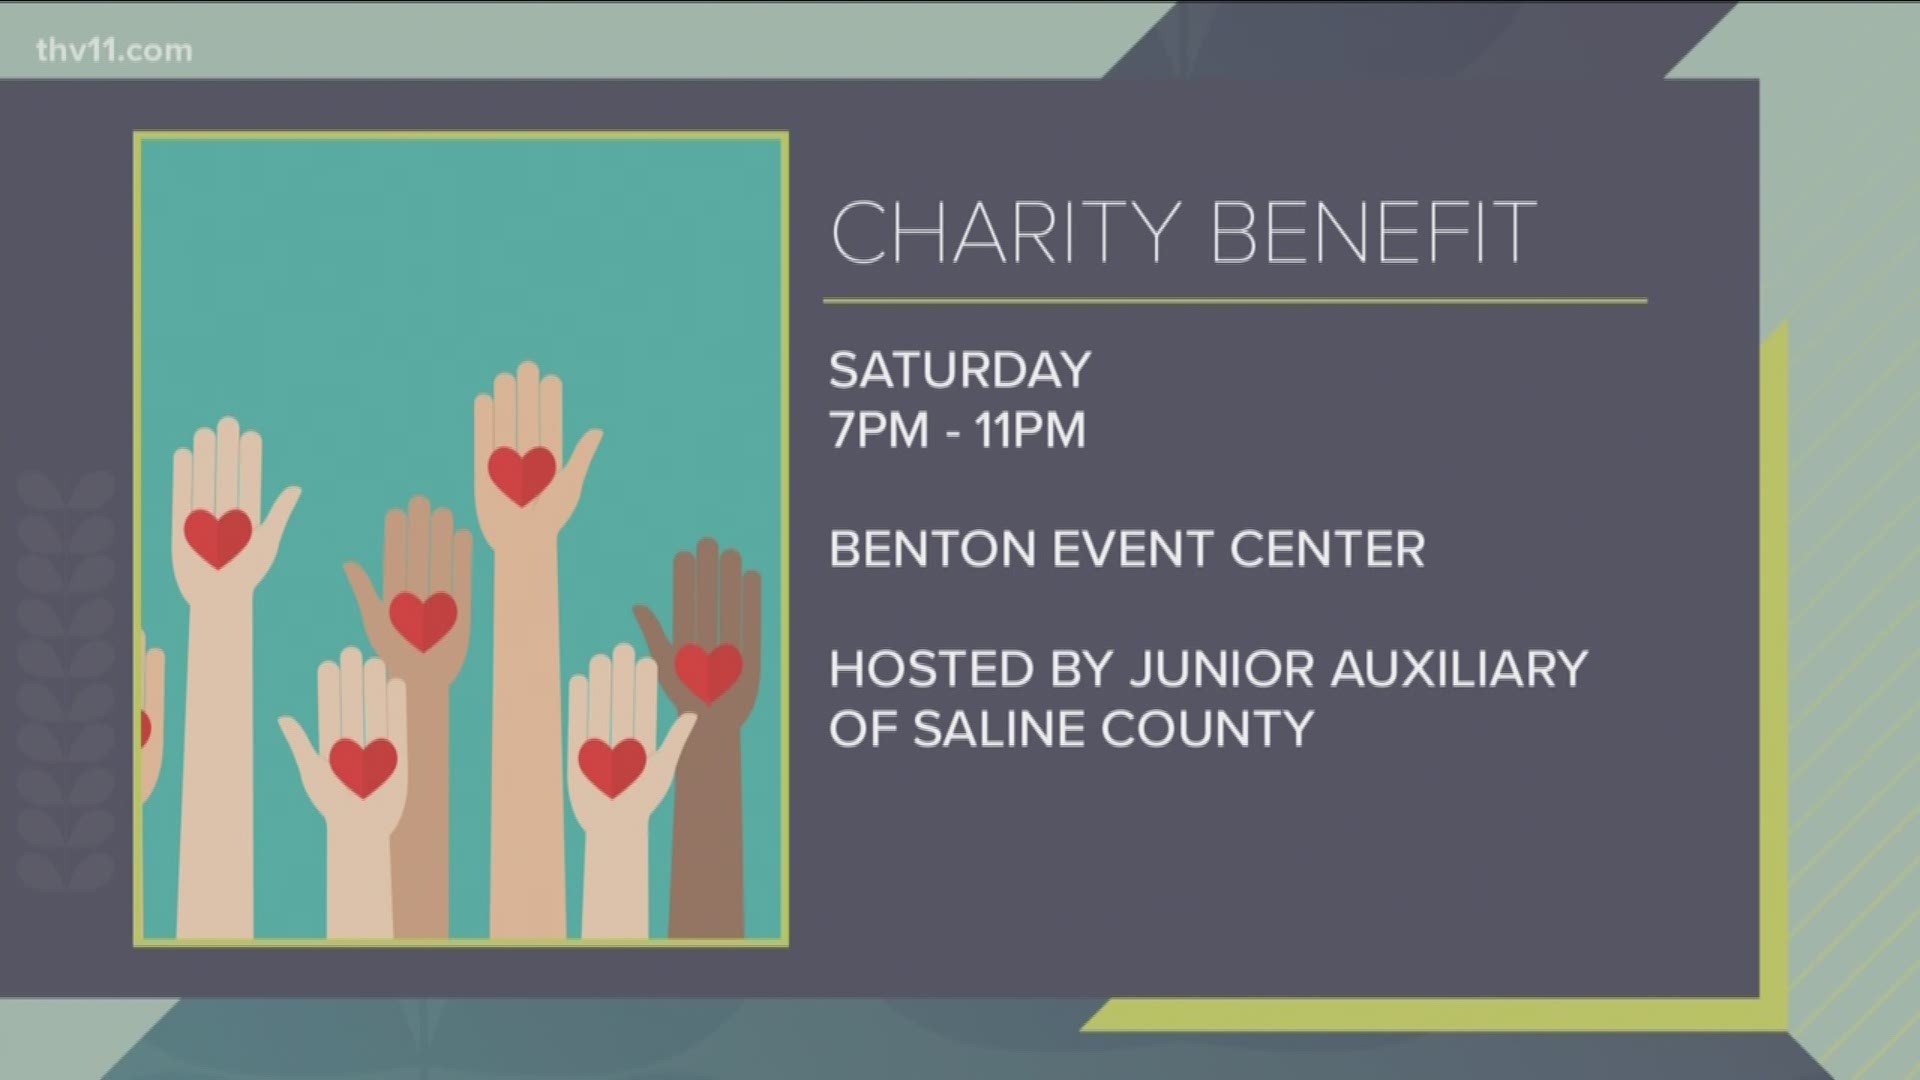 An upcoming fundraiser will provide meals for kids, mentors for young girls and so much more presented by the Junior Auxiliary of Saline County.